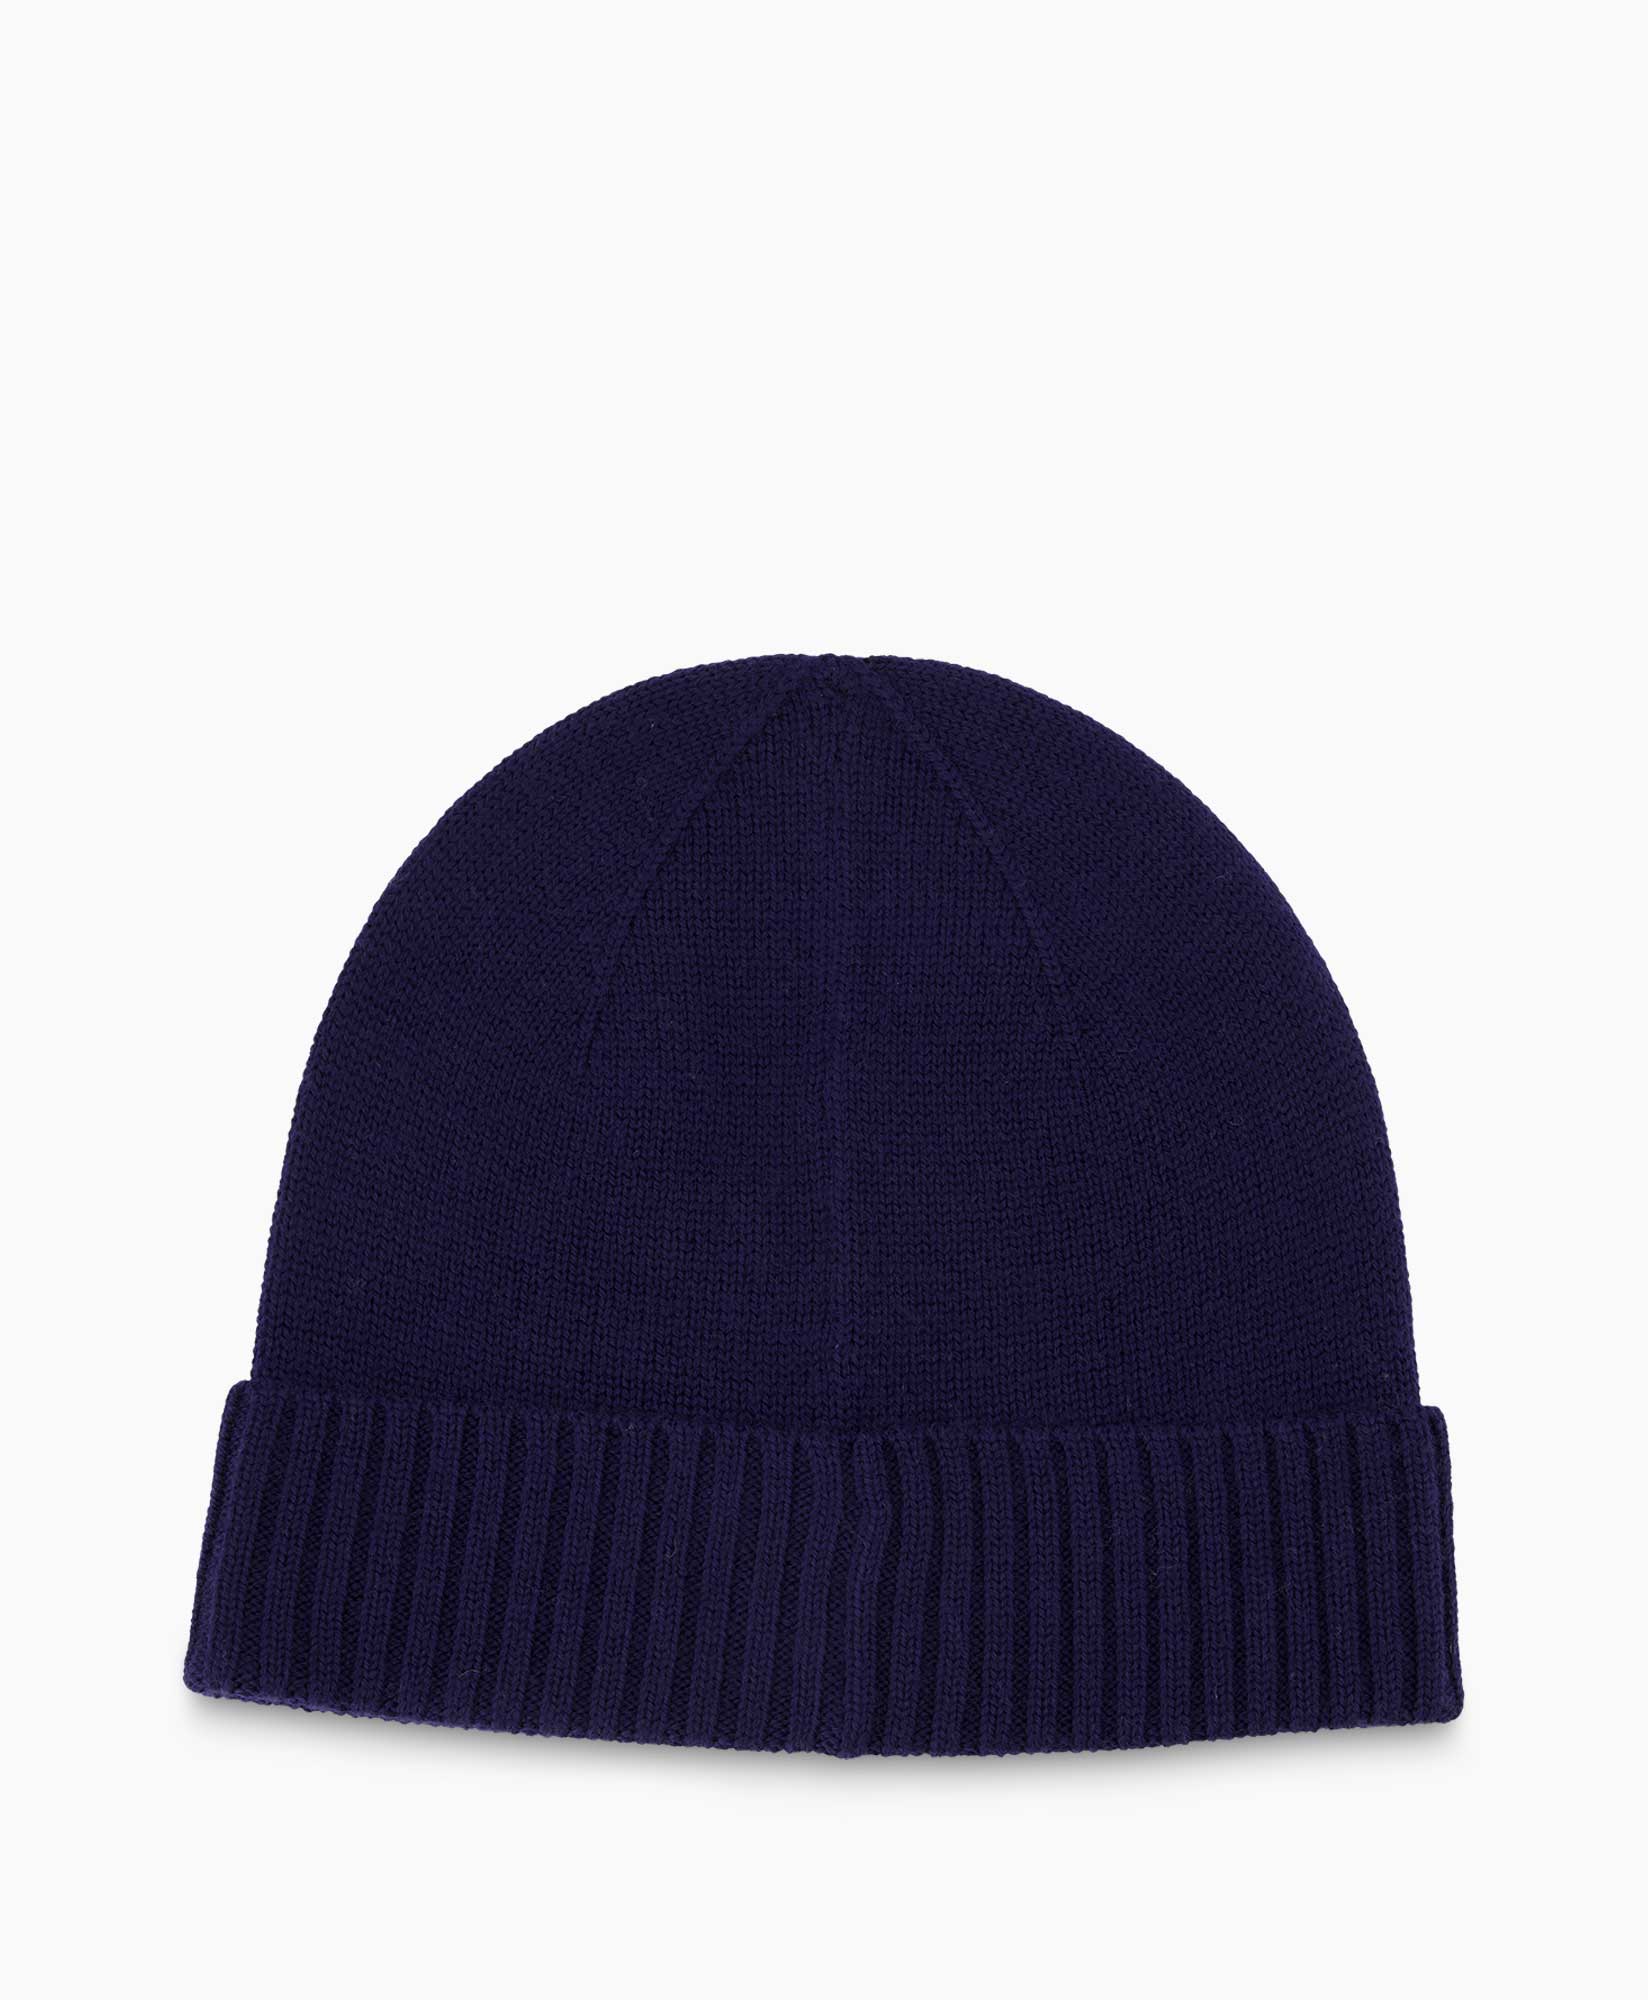 Muts Cold Weather Blauw